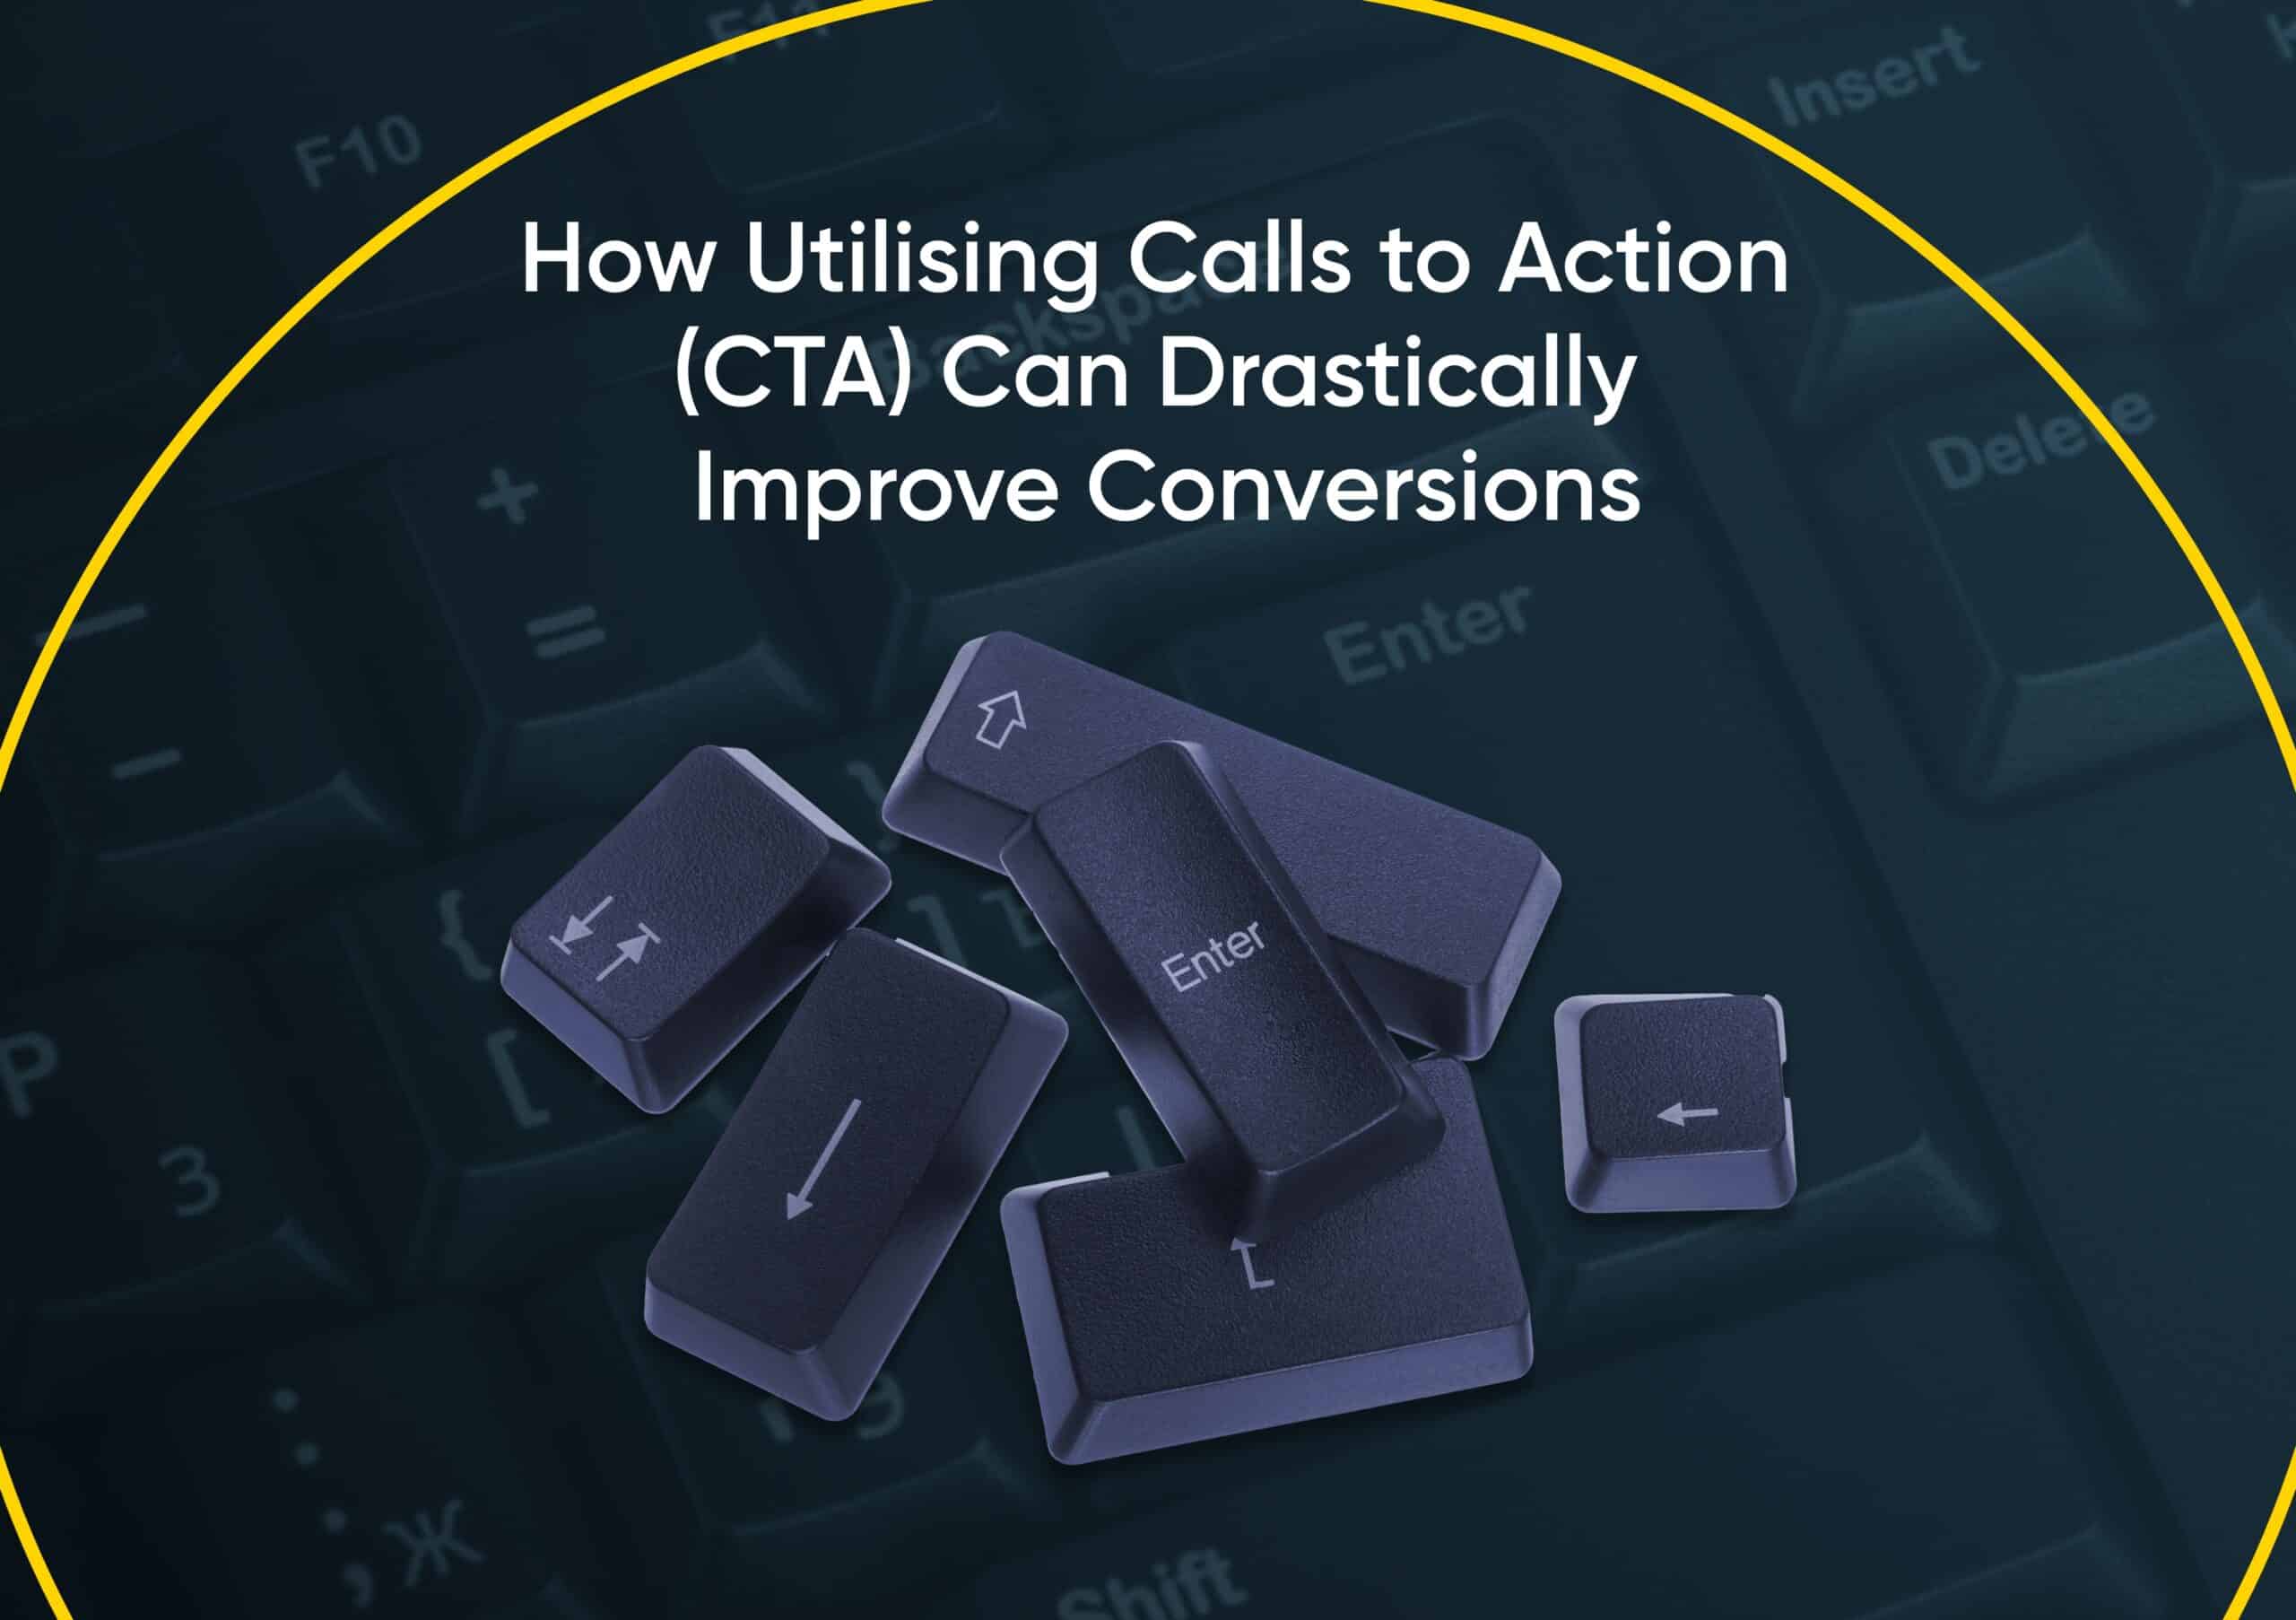 How Utilising Calls to Action (CTA) Can Drastically Improve Conversions